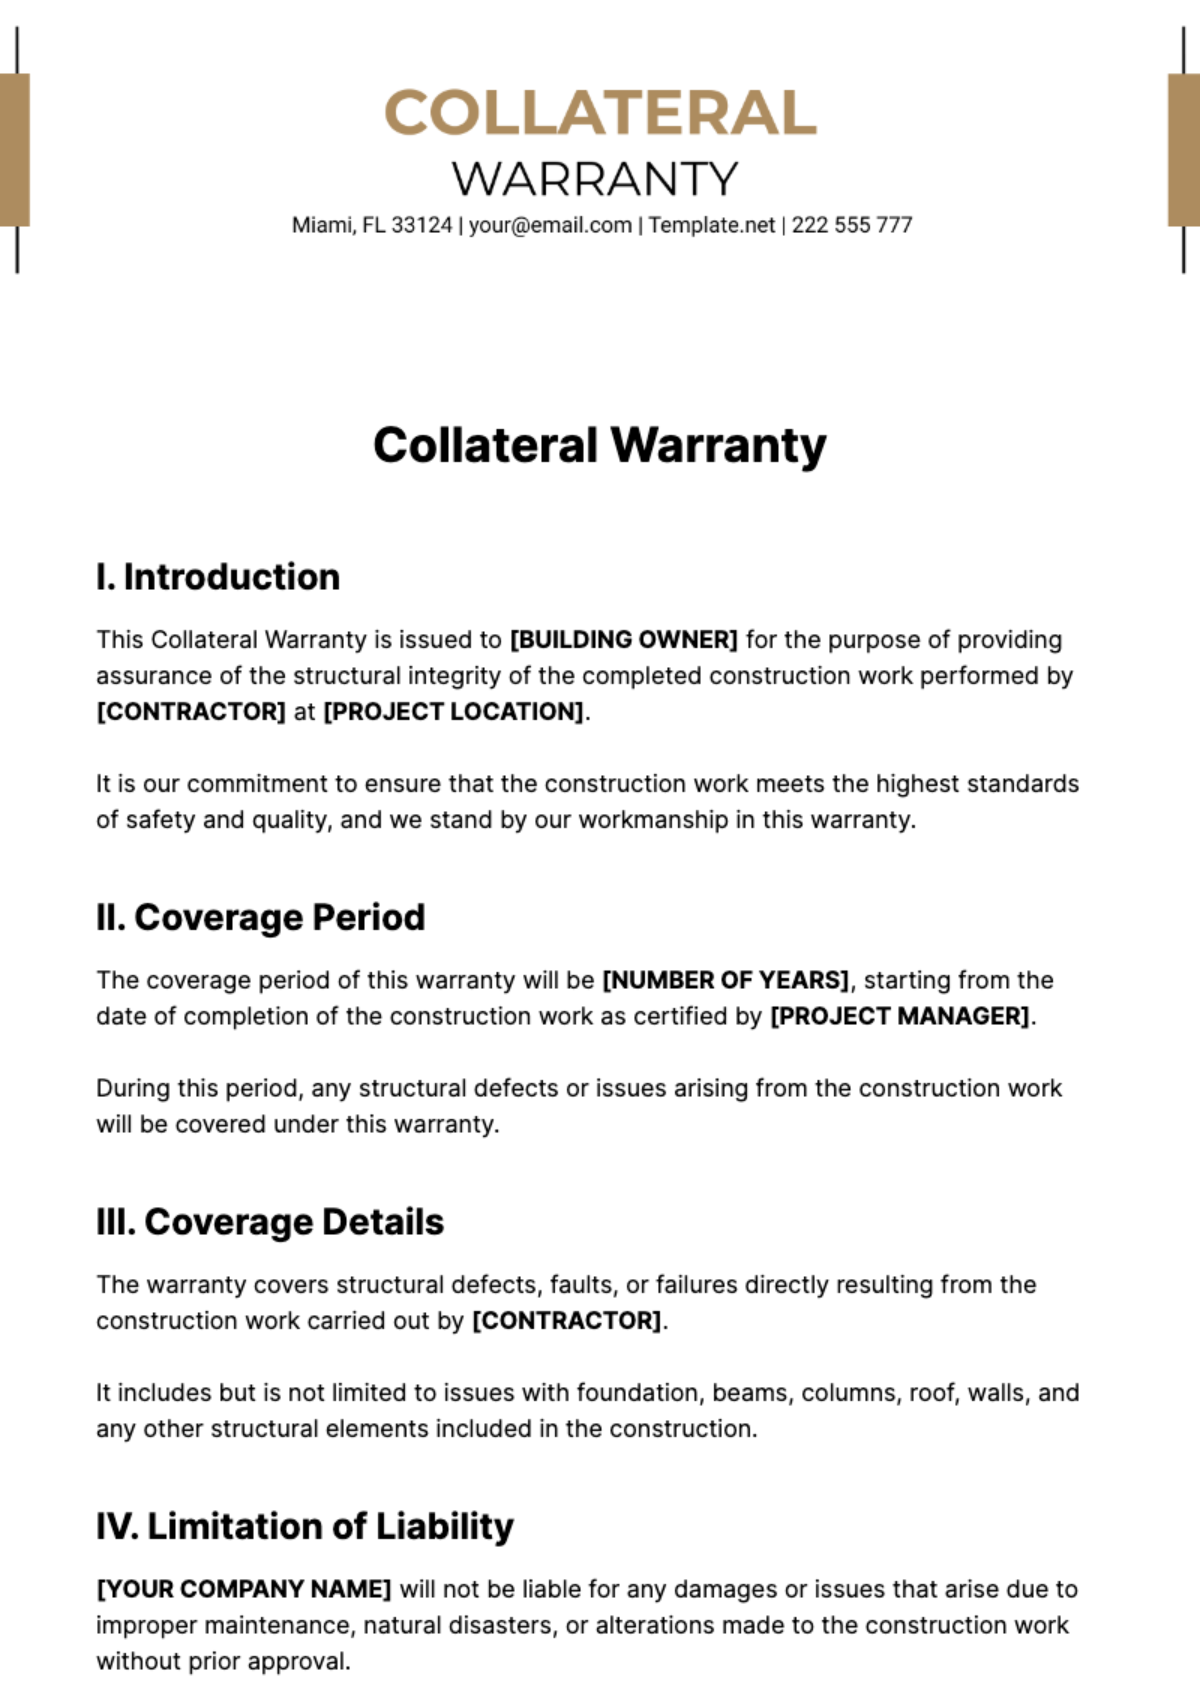 Collateral Warranty Template